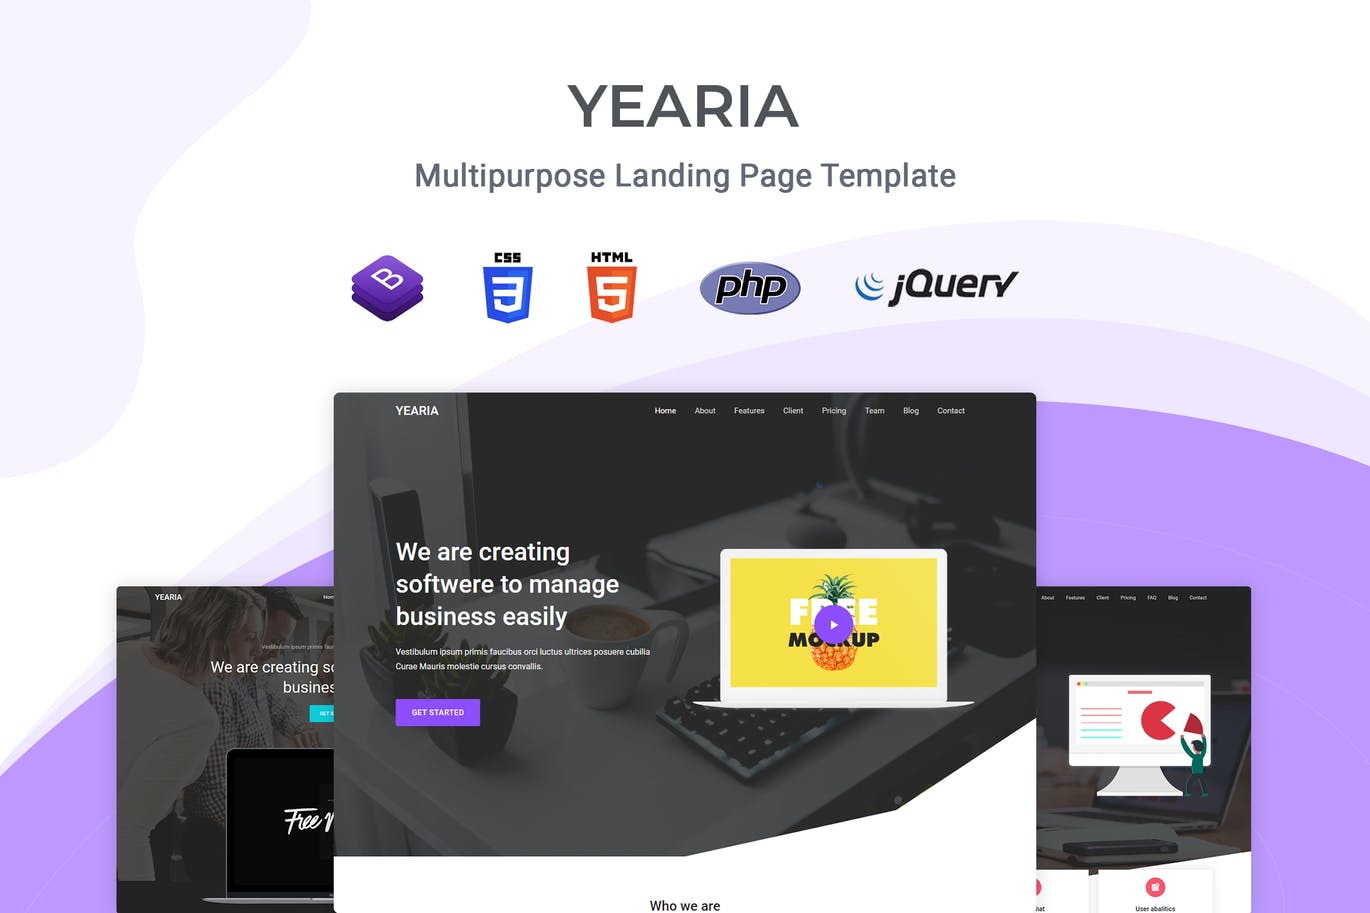 Bootstrap架构多用途网站着陆页HTML模板素材库精选 Yearia – Multipurpose Landing Page Template插图